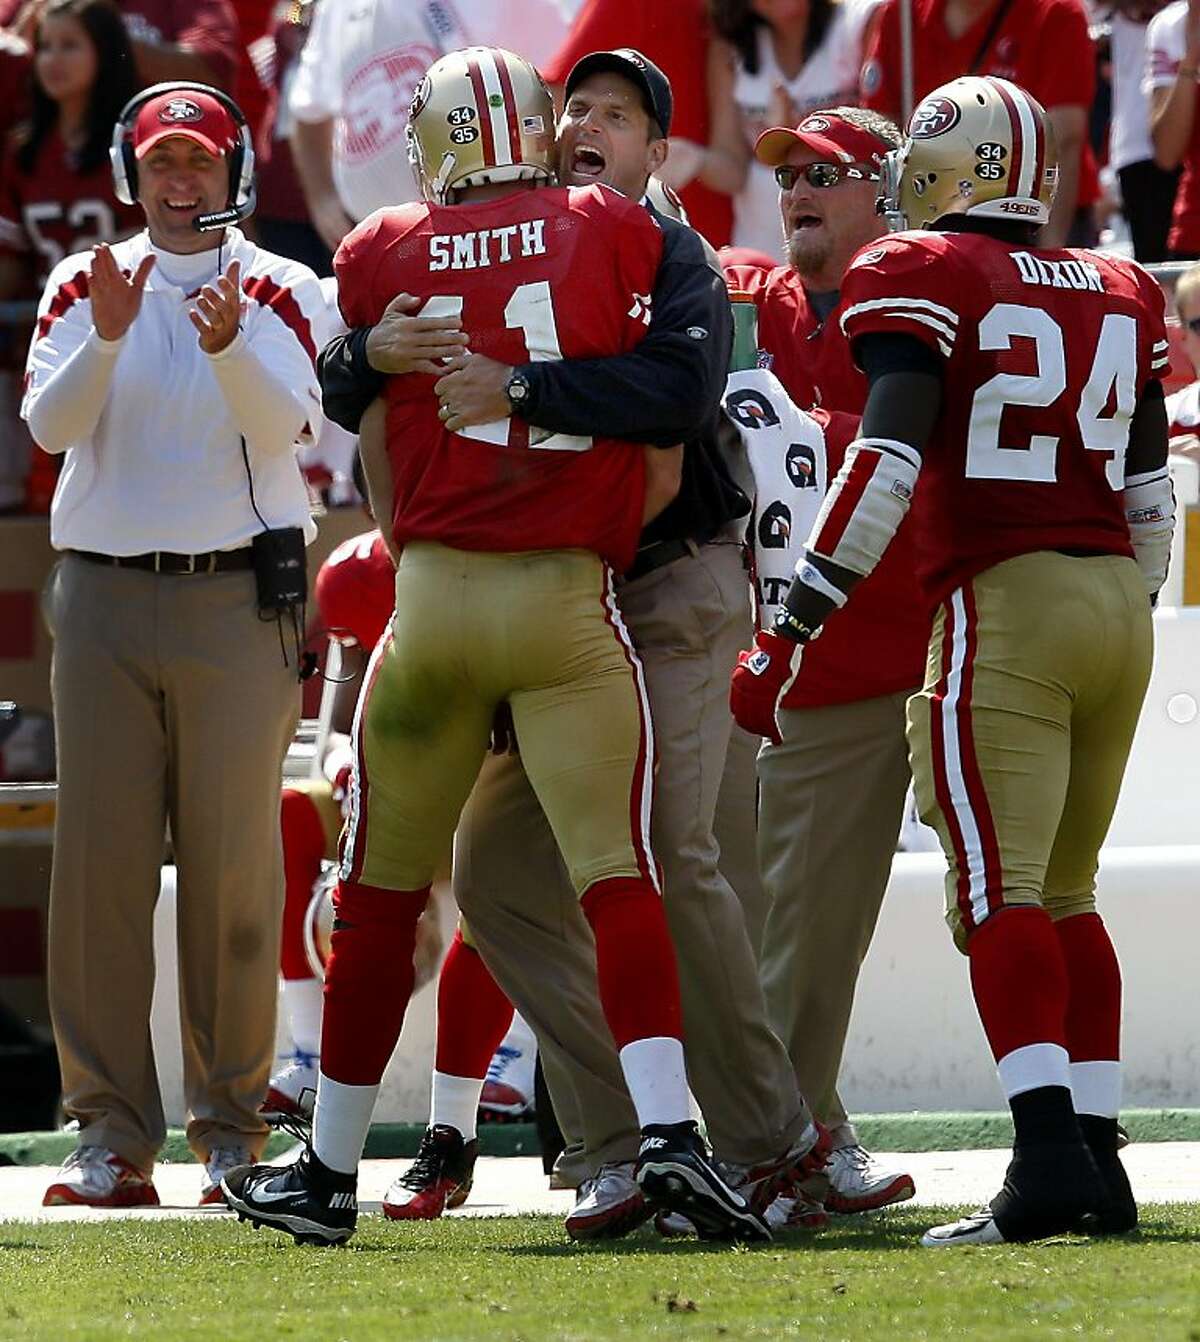 San Francisco 49er head coach Jim Harbaugh welcomed Alex Smith back to the sideline after his 2nd quarter touchdown. San Francisco 49ers in action against the Seattle Seahawks Sunday September 11, 2011 at Candlestick Park.